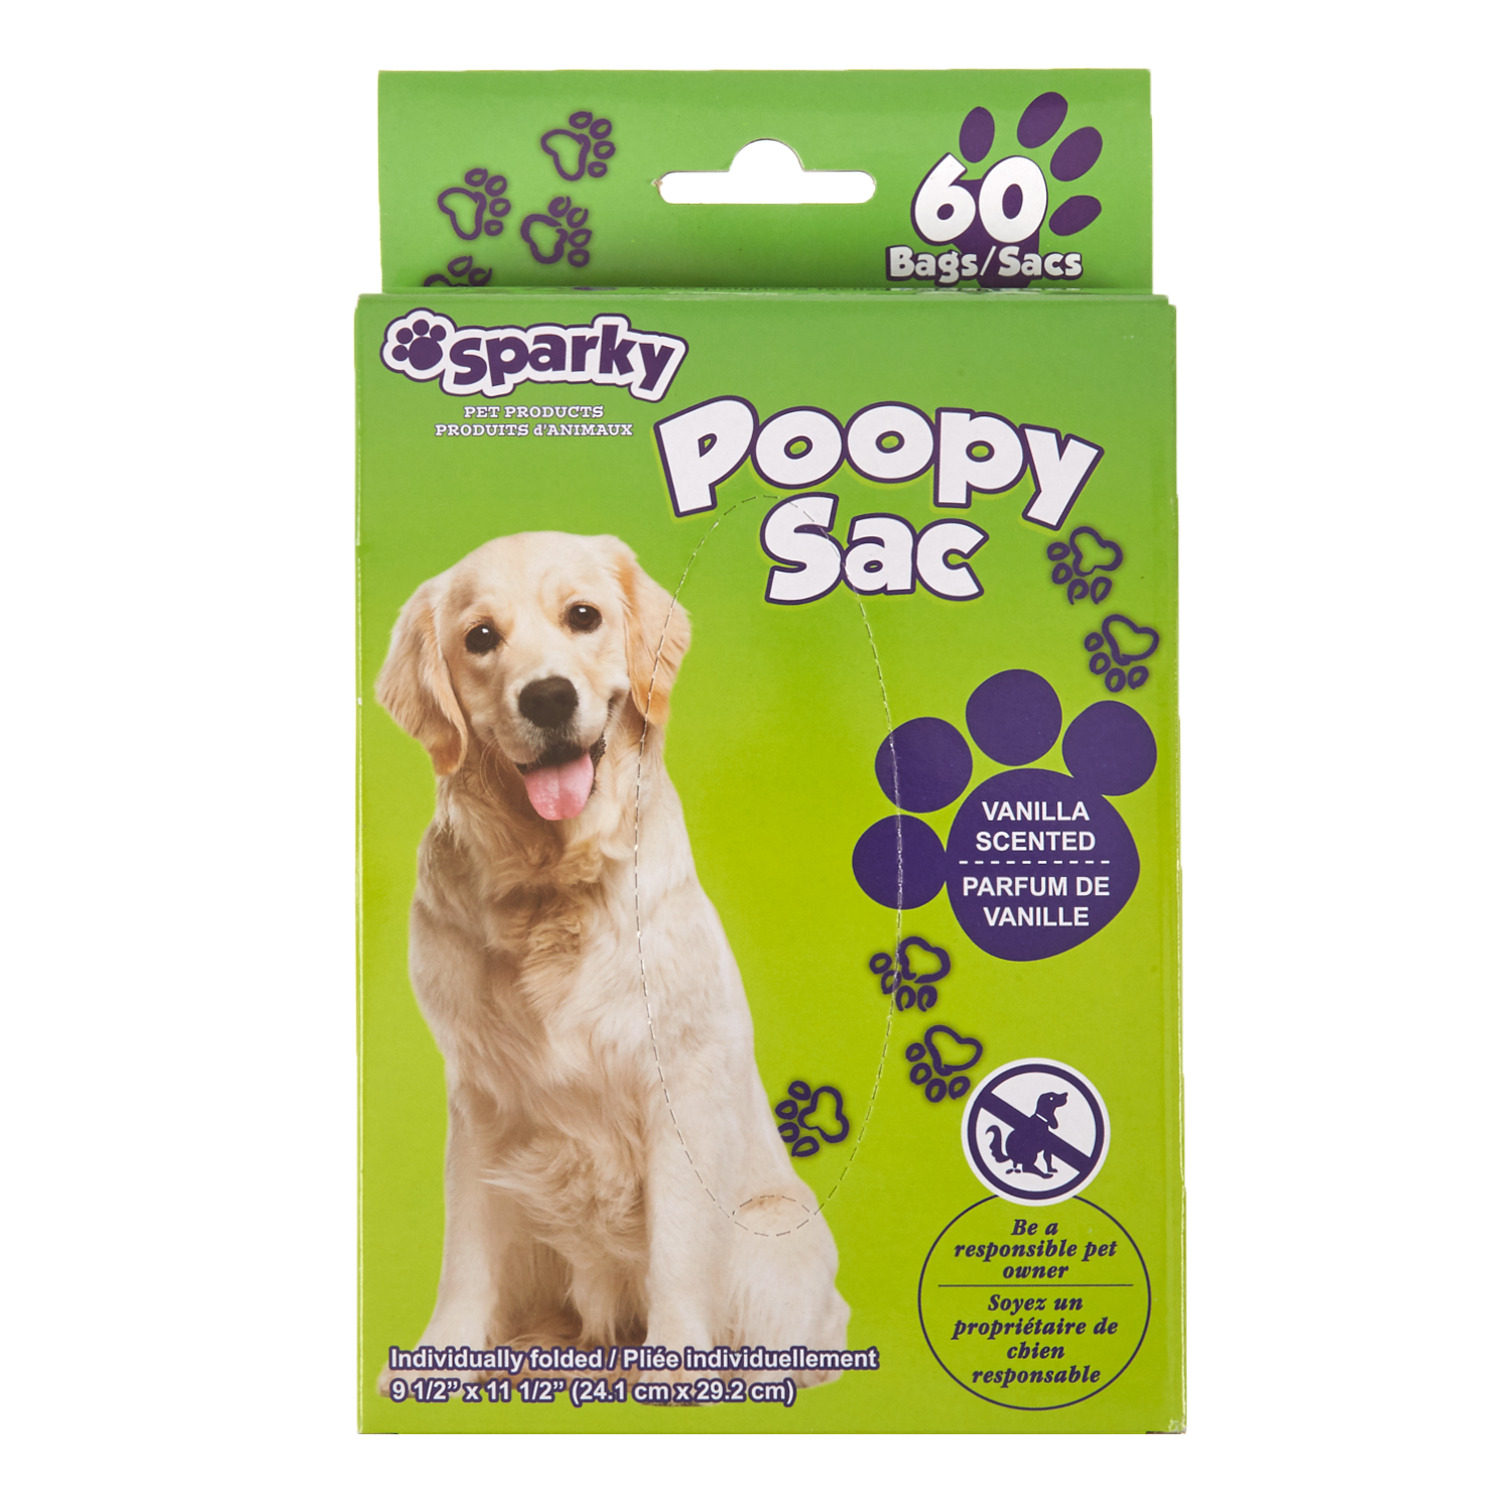 Sparky - Poopy Sac - Pet waste bags, vanilla scented, pk. of 60